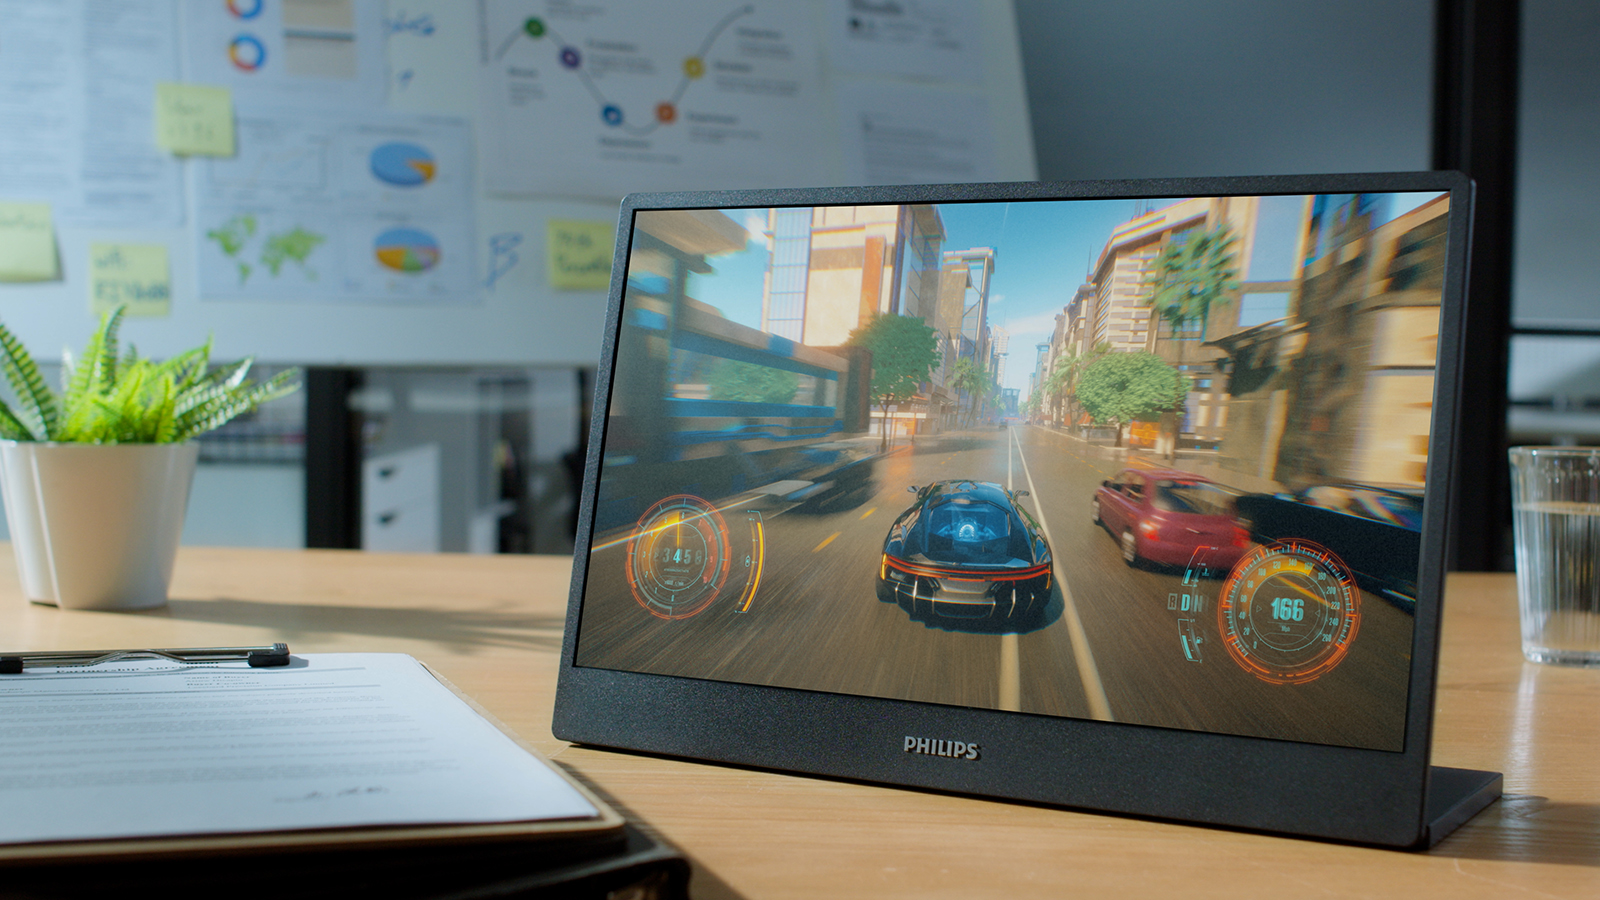 Philips 16B1P3302 review: a portable monitor for almost anywhere